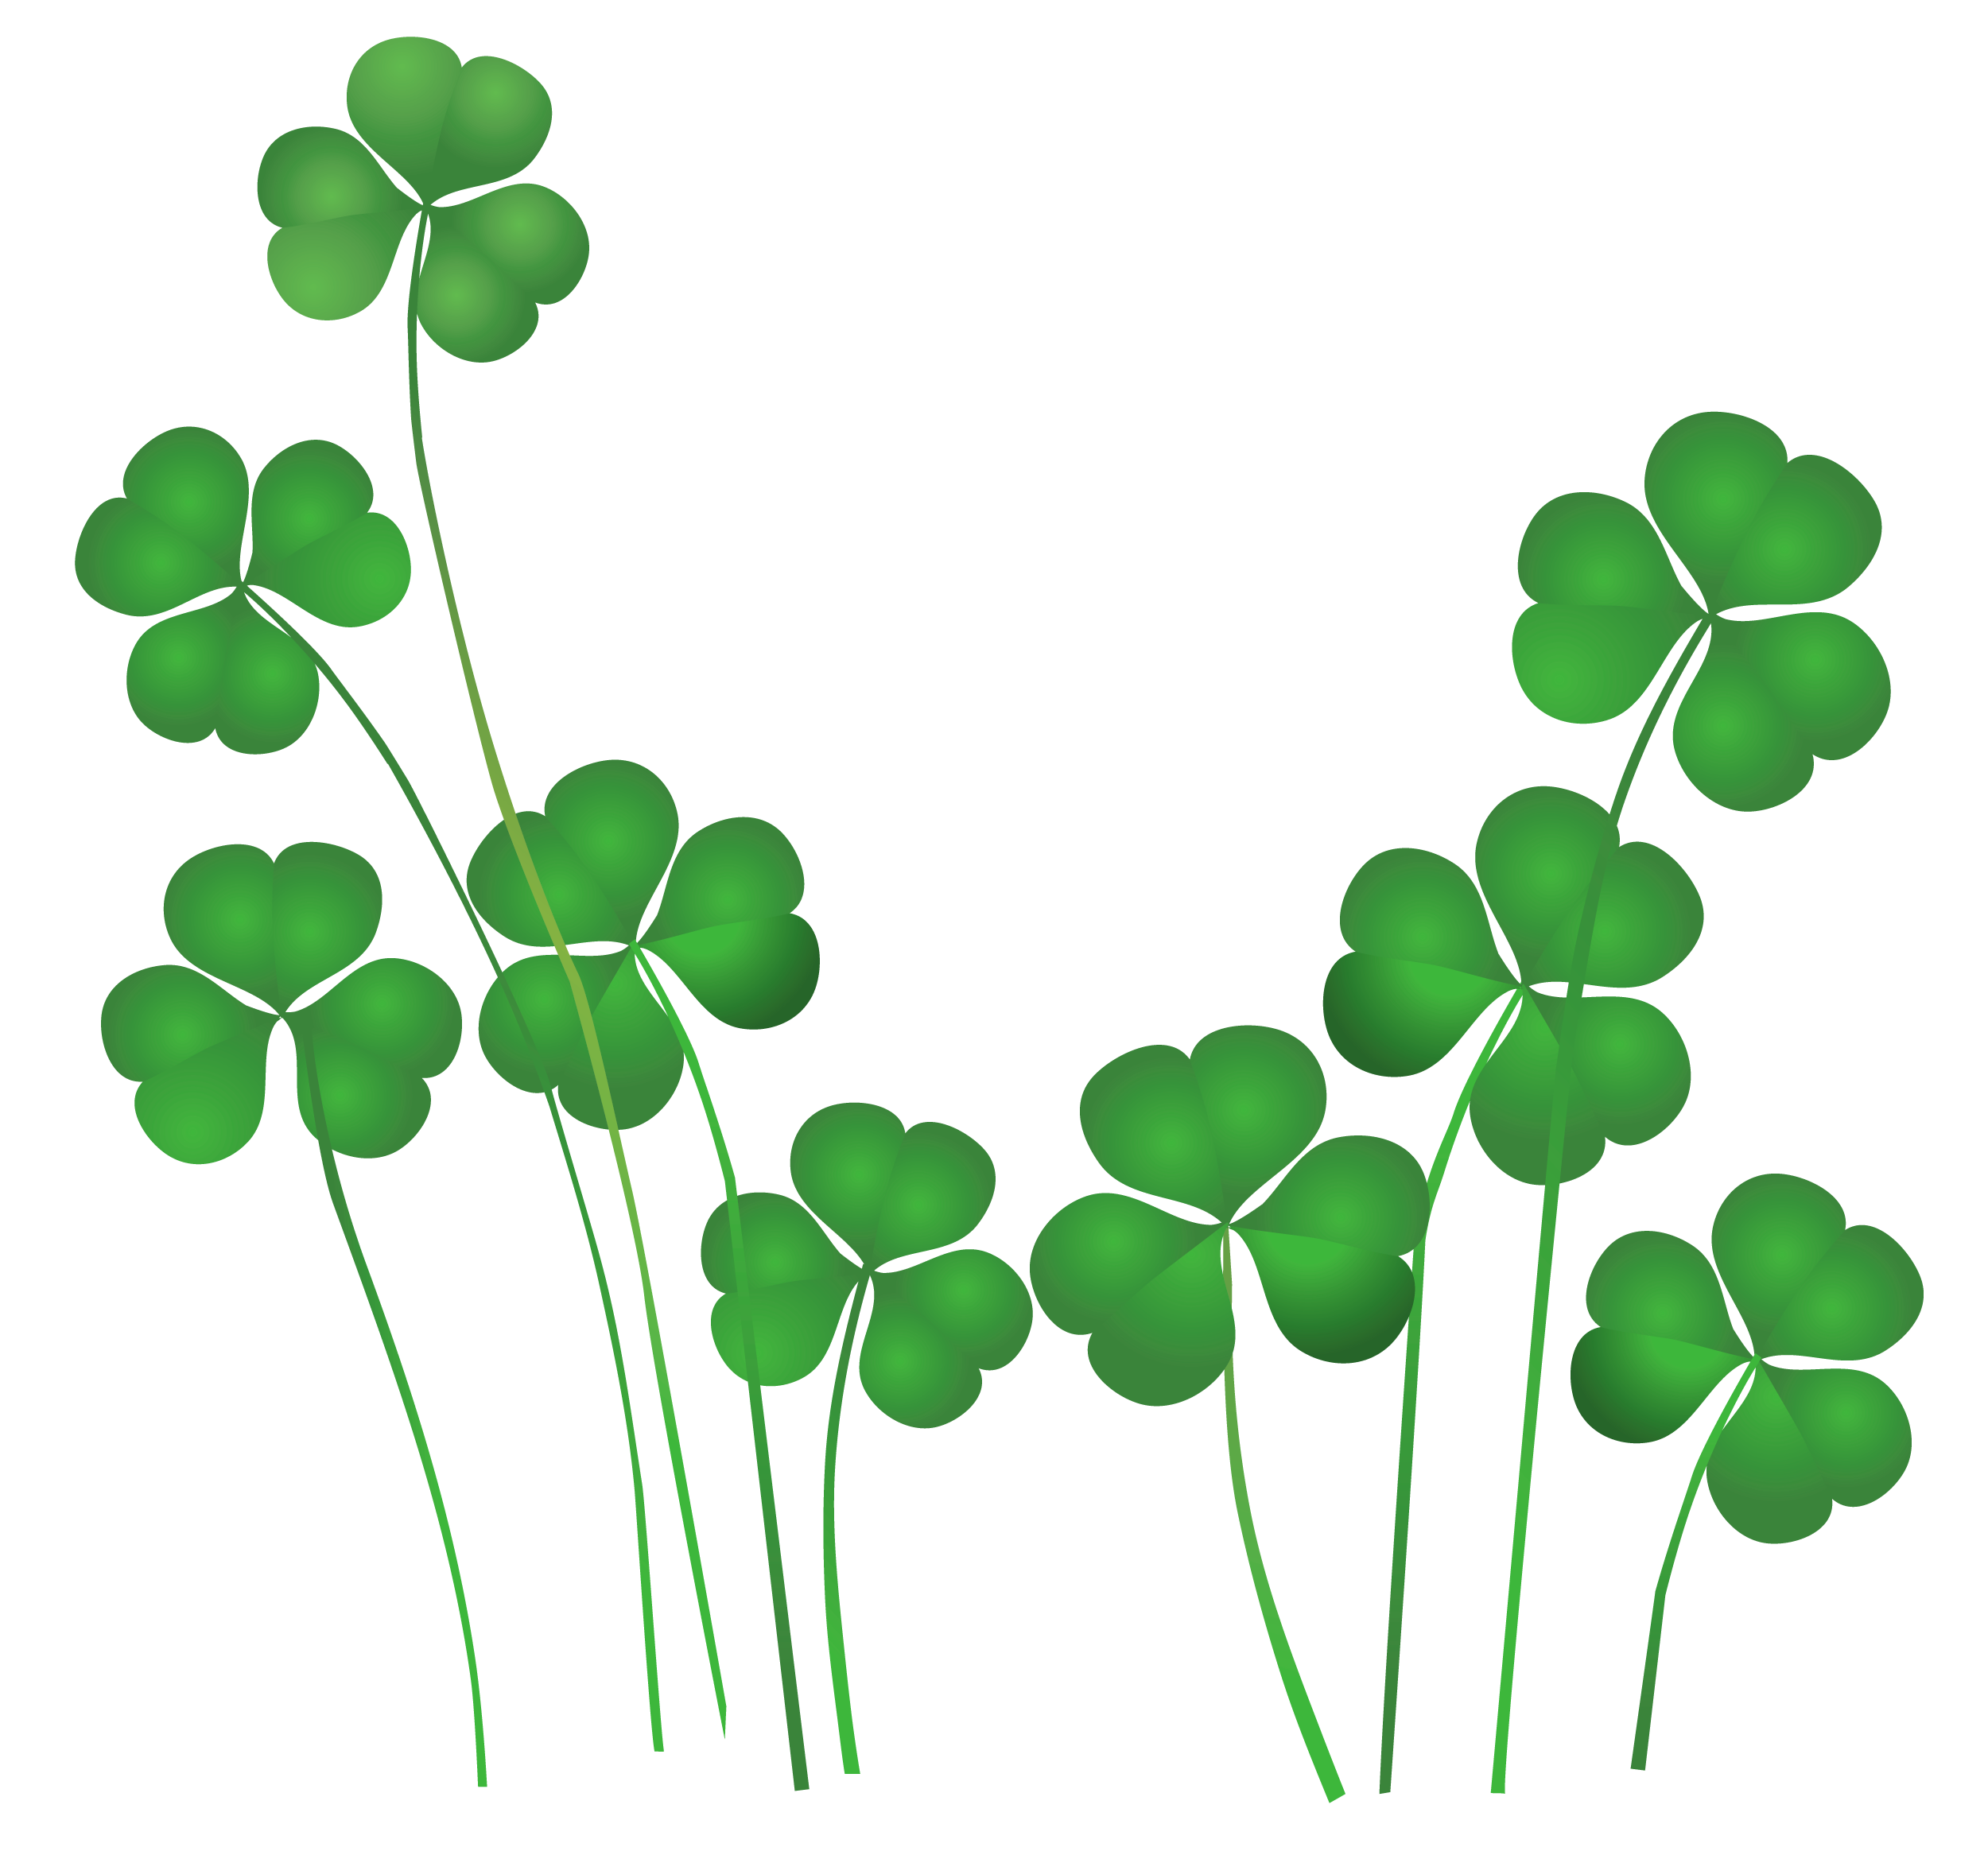 Picture Of A Shamrock - Clipa